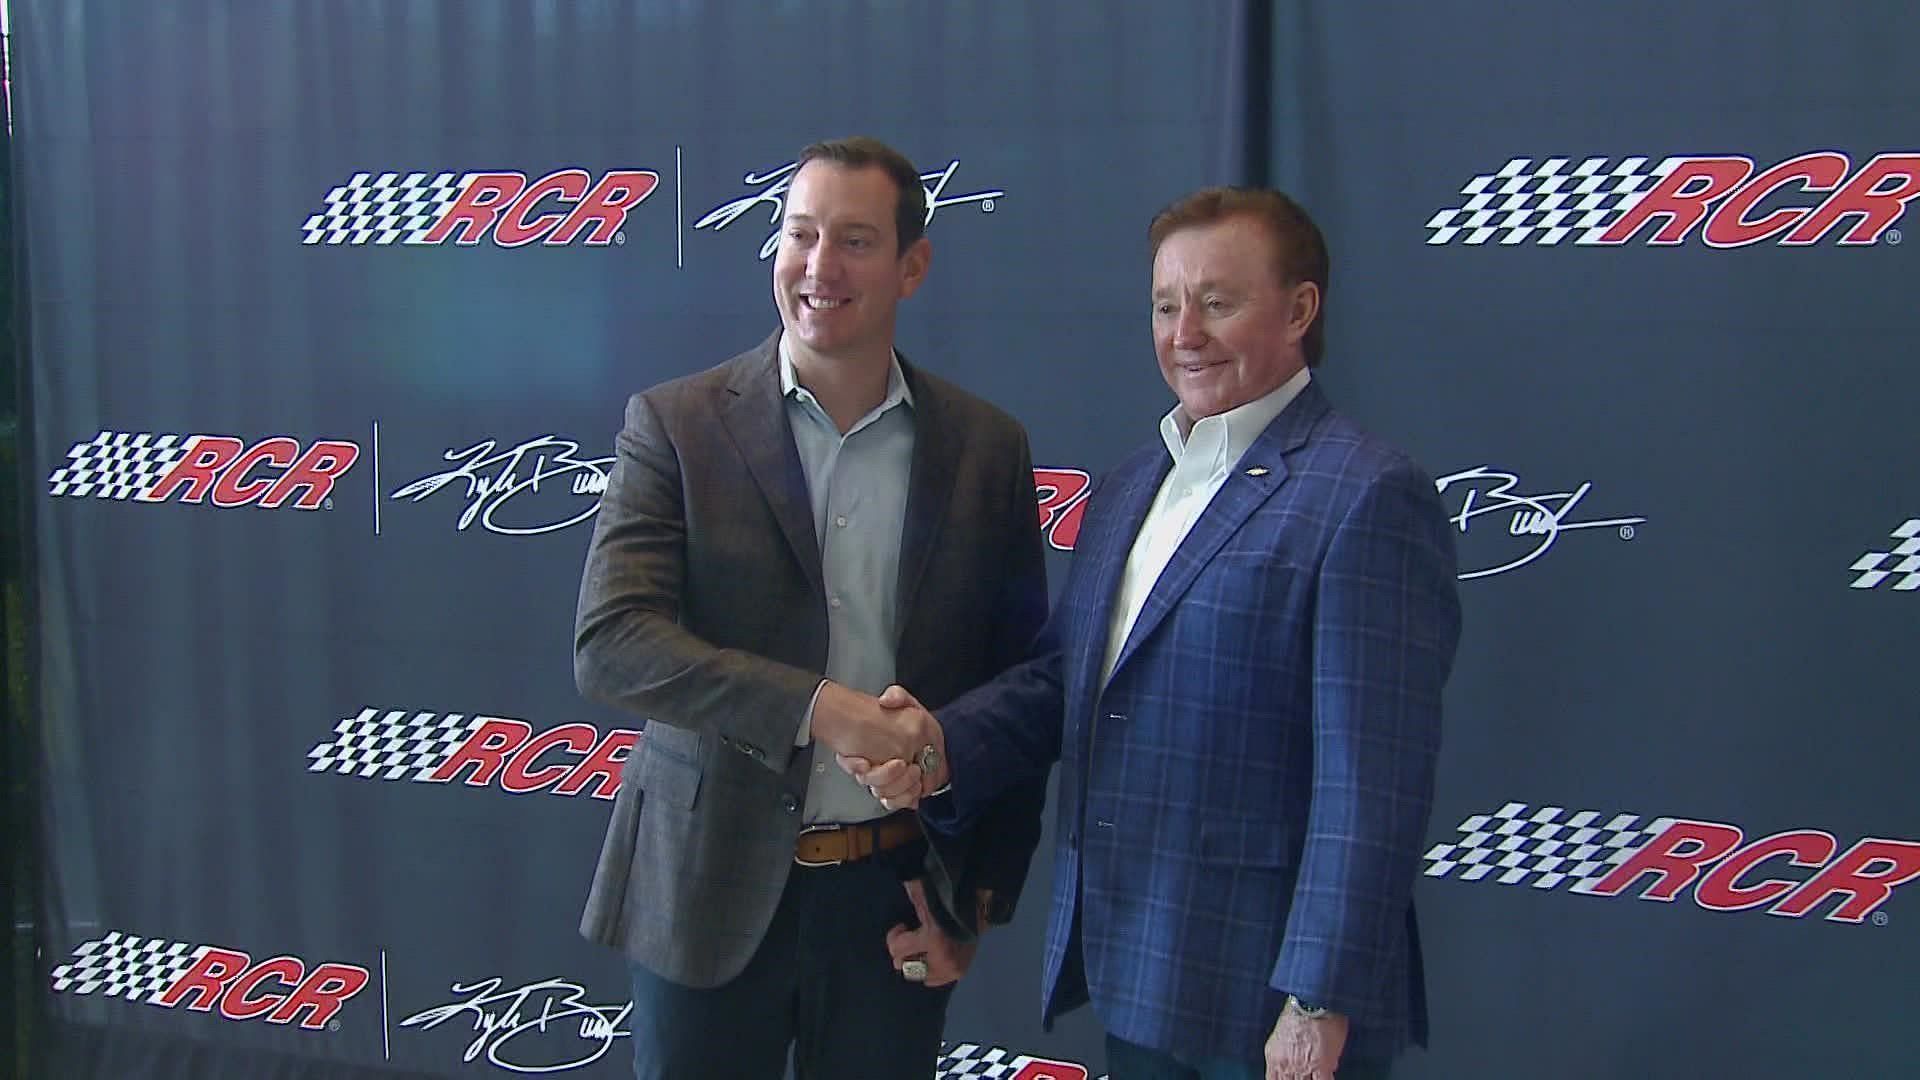 Kyle Busch and Richard Childress (credit: wfmy news 2)